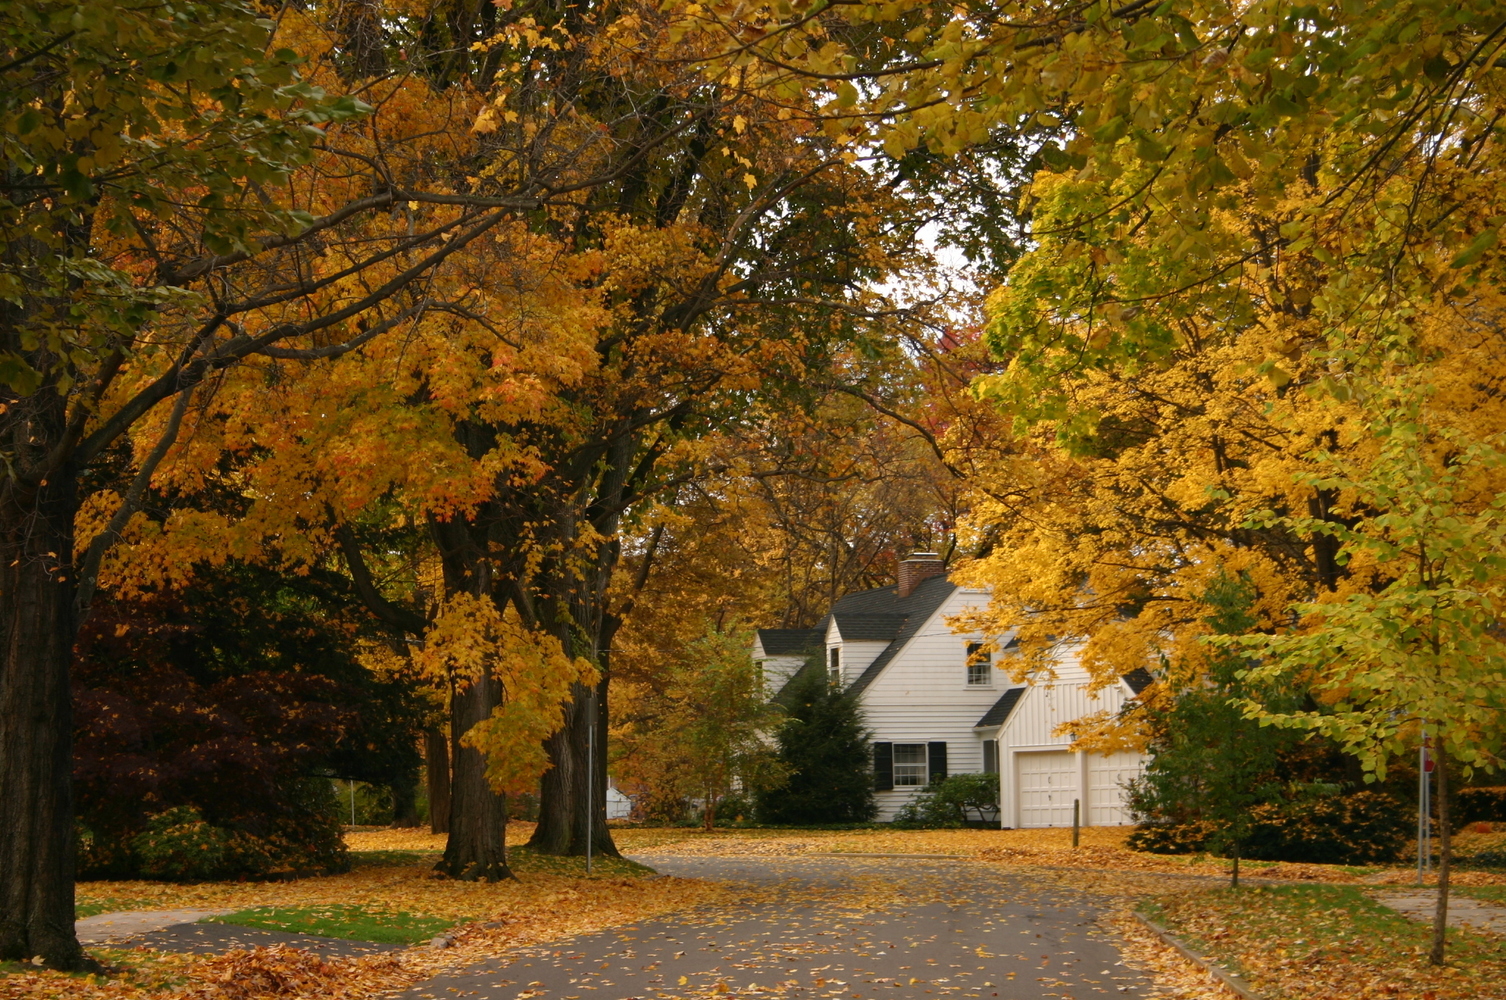 Prep For Winter With These Autumn Home Maintenance Tips